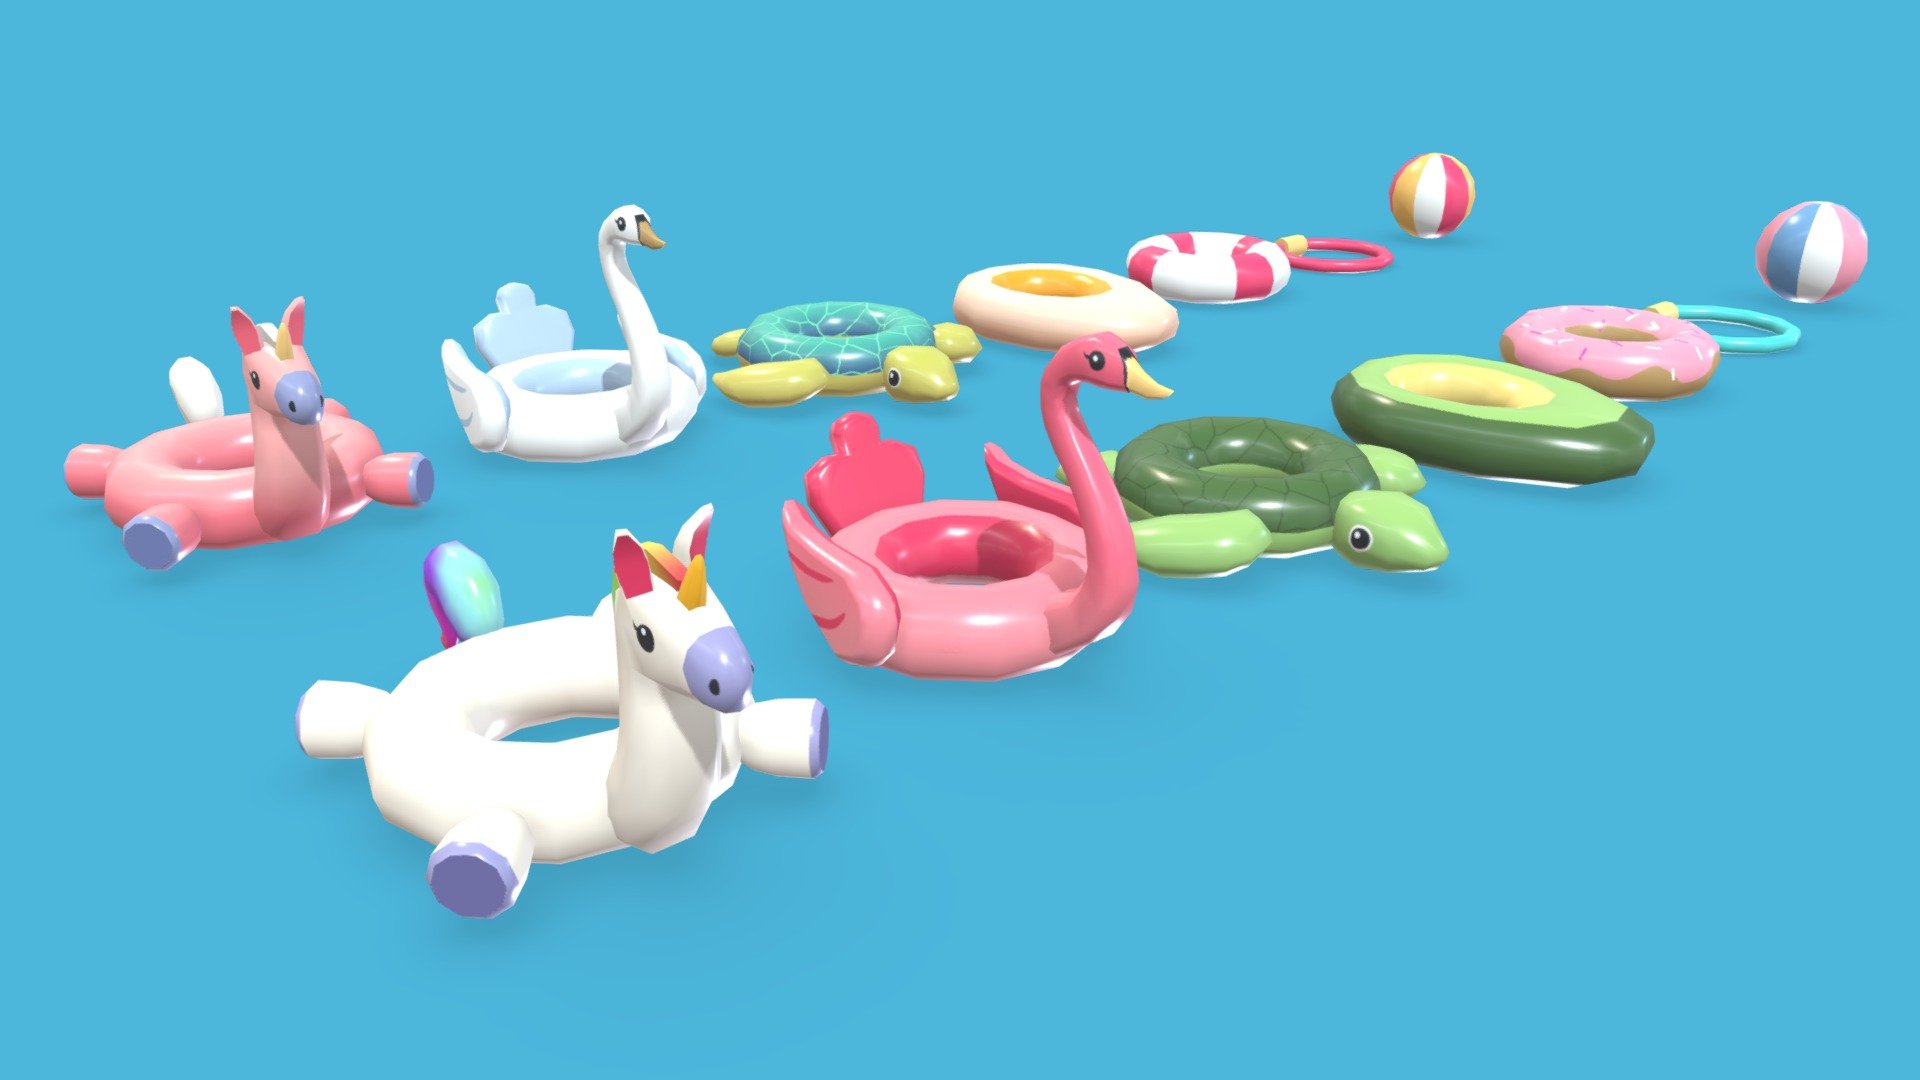 This asset pack contains some cute cartoon inflatable pool toys and floaties.
Those low-poly models are perfect for colorful and stylized swimming pool or beach scenes.

Low-poly assets for real-time use
Optimized and clean UV mapping




Unicorn - 1321 tris

Swan - 1034 tris

Turtle  - 804 tris

Avocado &amp; Egg - 288 tris

Donut &amp; Lifebelt - 288 tris

Pool ball - 162 tris

Pool noodle - 300 tris
 - Luceed Studio - Pool Toys & Floaties - 3D model by Luceed Studio (@luceedstudio) 3d model